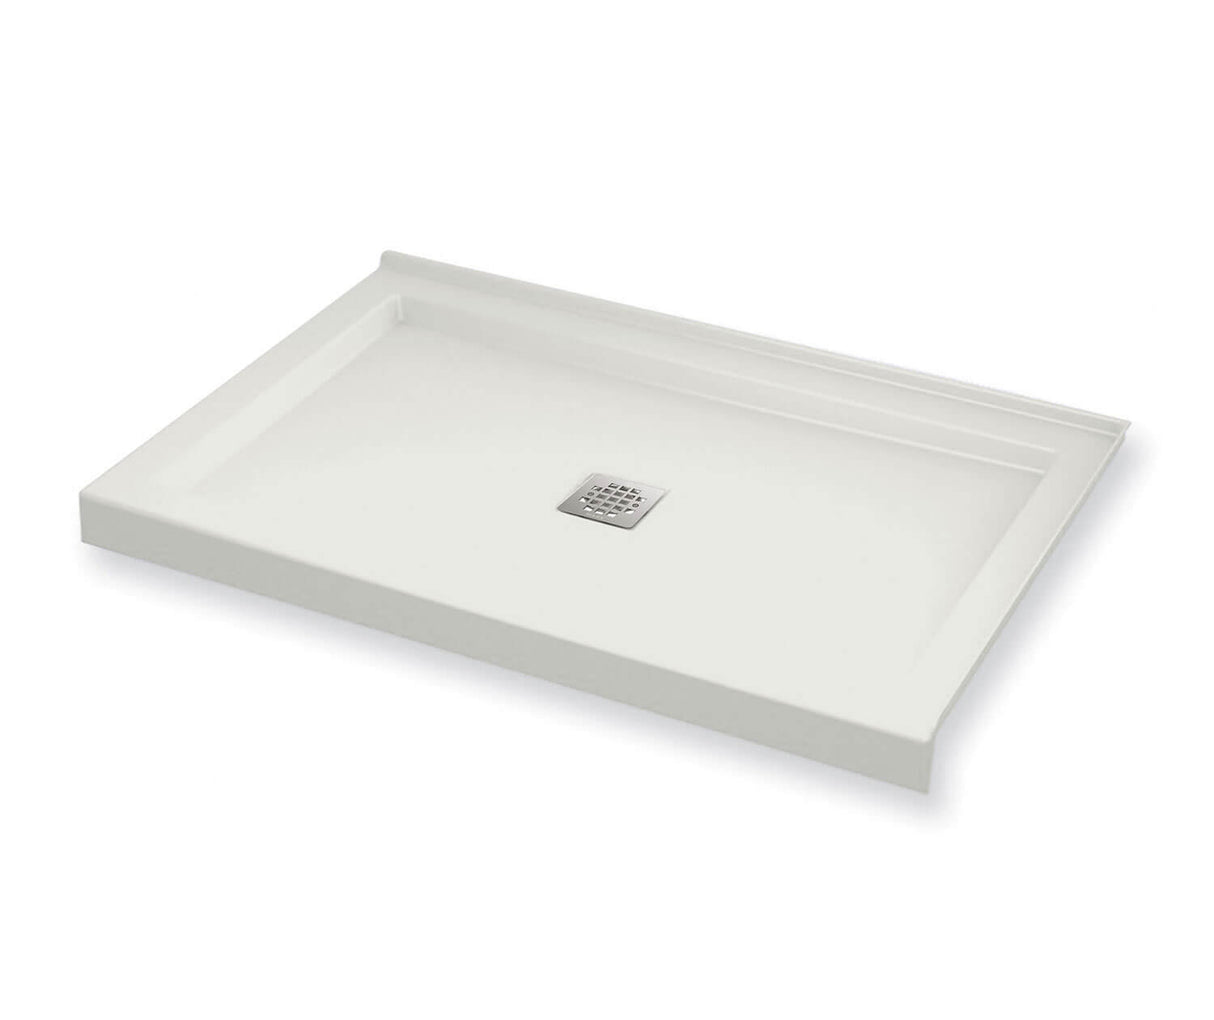 MAAX 420001-503-001-100 B3Square 4832 Acrylic Corner Right Shower Base in White with Center Drain